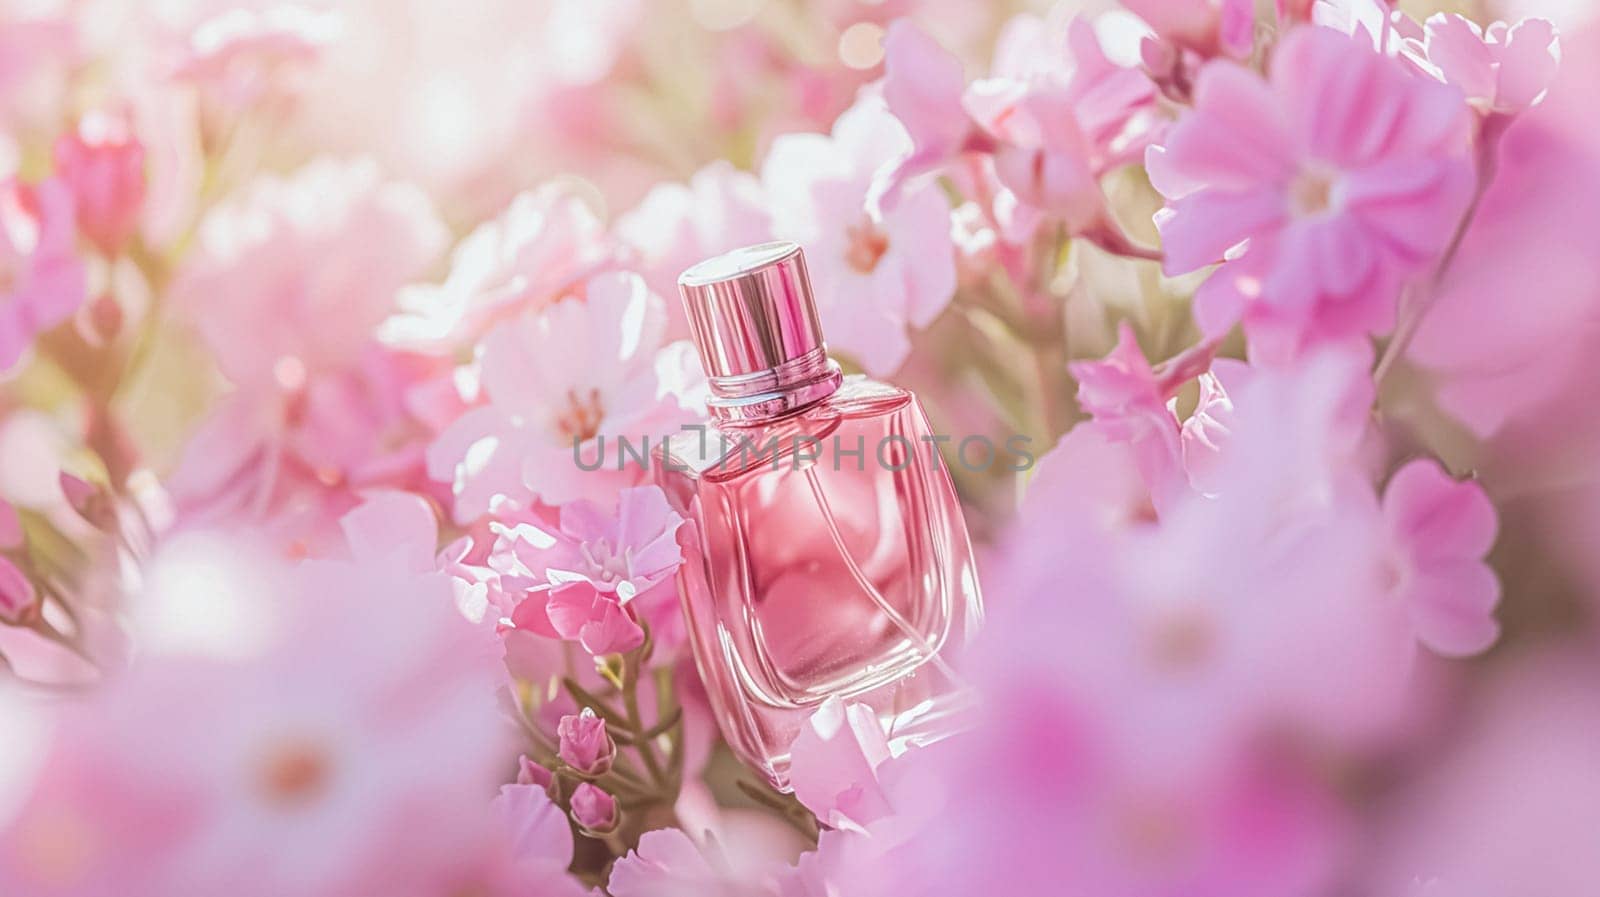 Perfume bottle with beautiful flowers. Floral background. Beauty concept. Flat lay, top view.